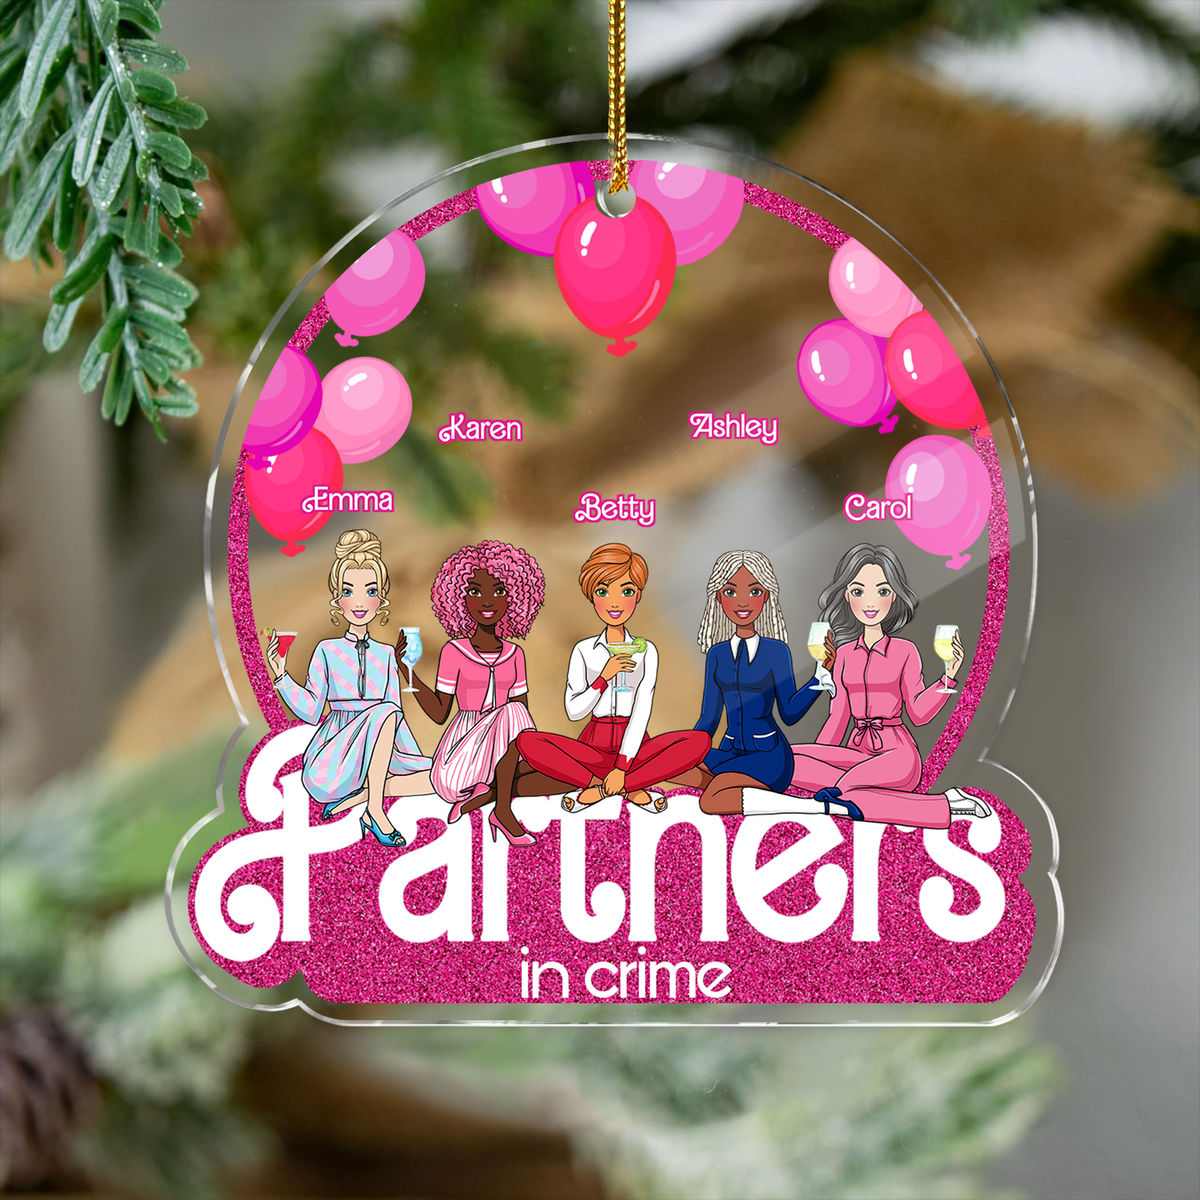 Unique Personalized Gift - Custom Acrylic Ornament - Best Gifts For Partners in Crime (b1)_3